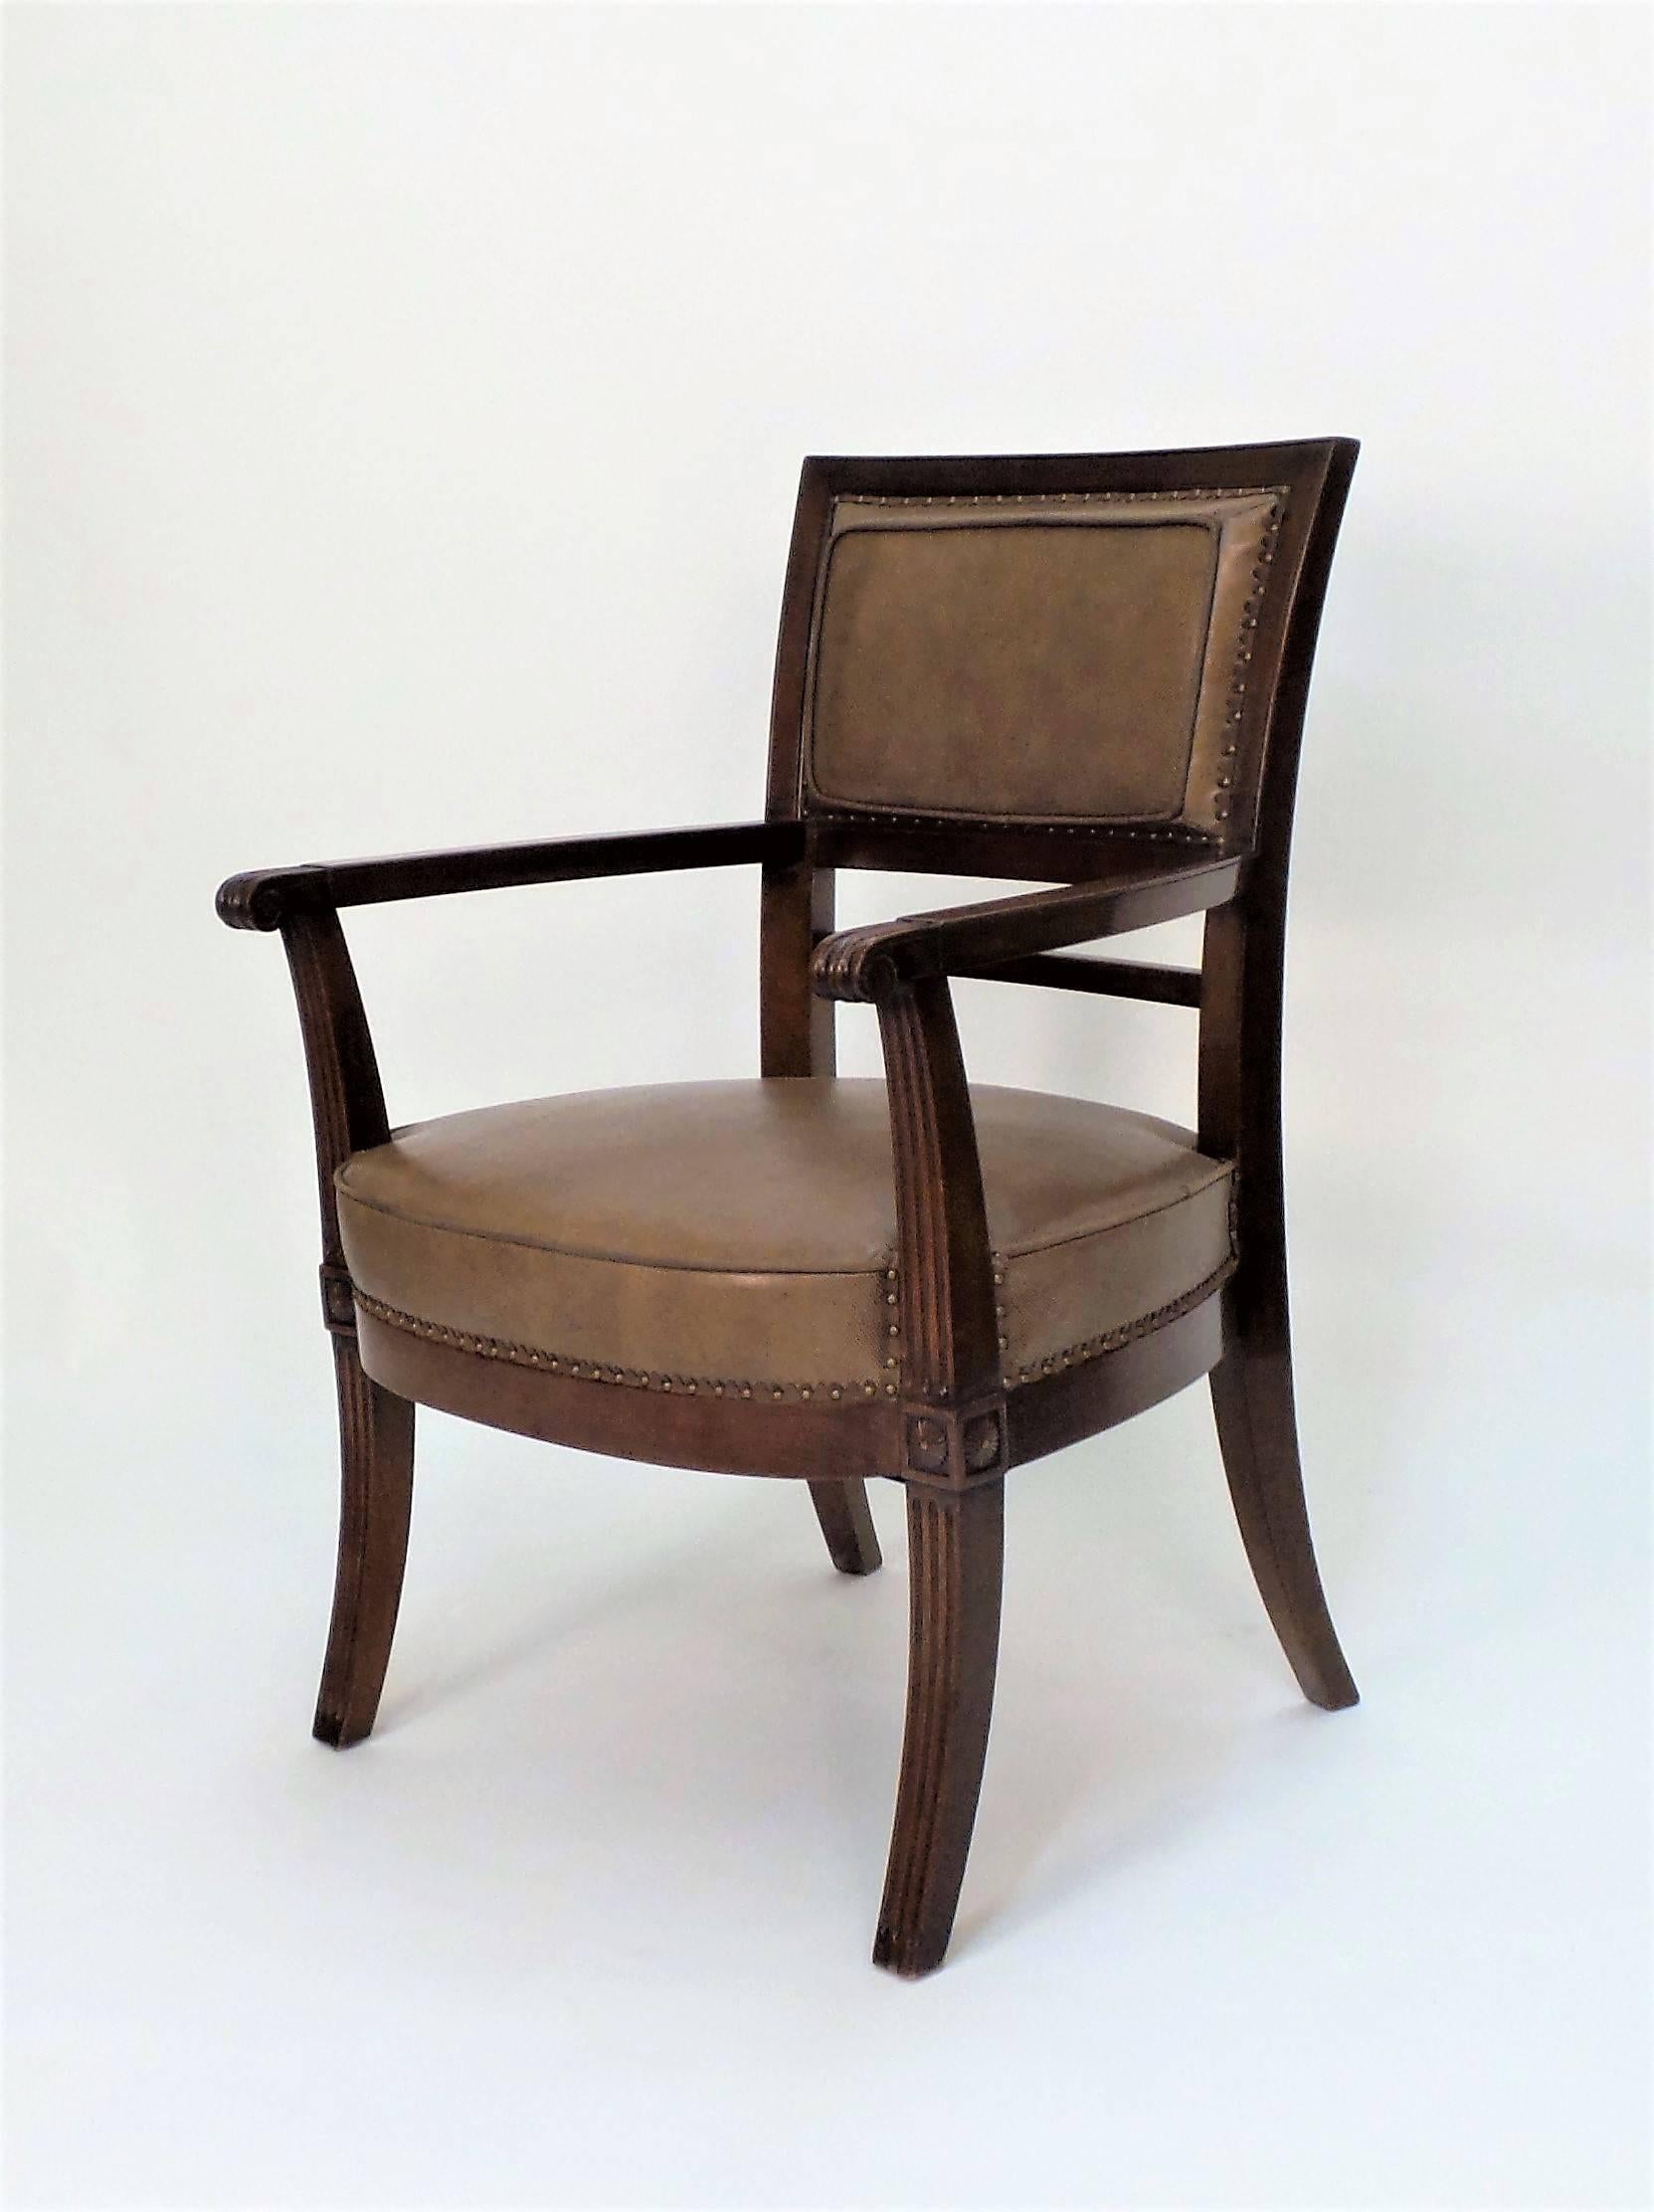 An Empire style armchair inspired by a design by master chairmaker J.B.B. Demay, shown with "en tableau" boxed leather upholstery, hand-tied sprung seat, with spaced nails over a cut-leather tape trim. Custom upholstery and finishes